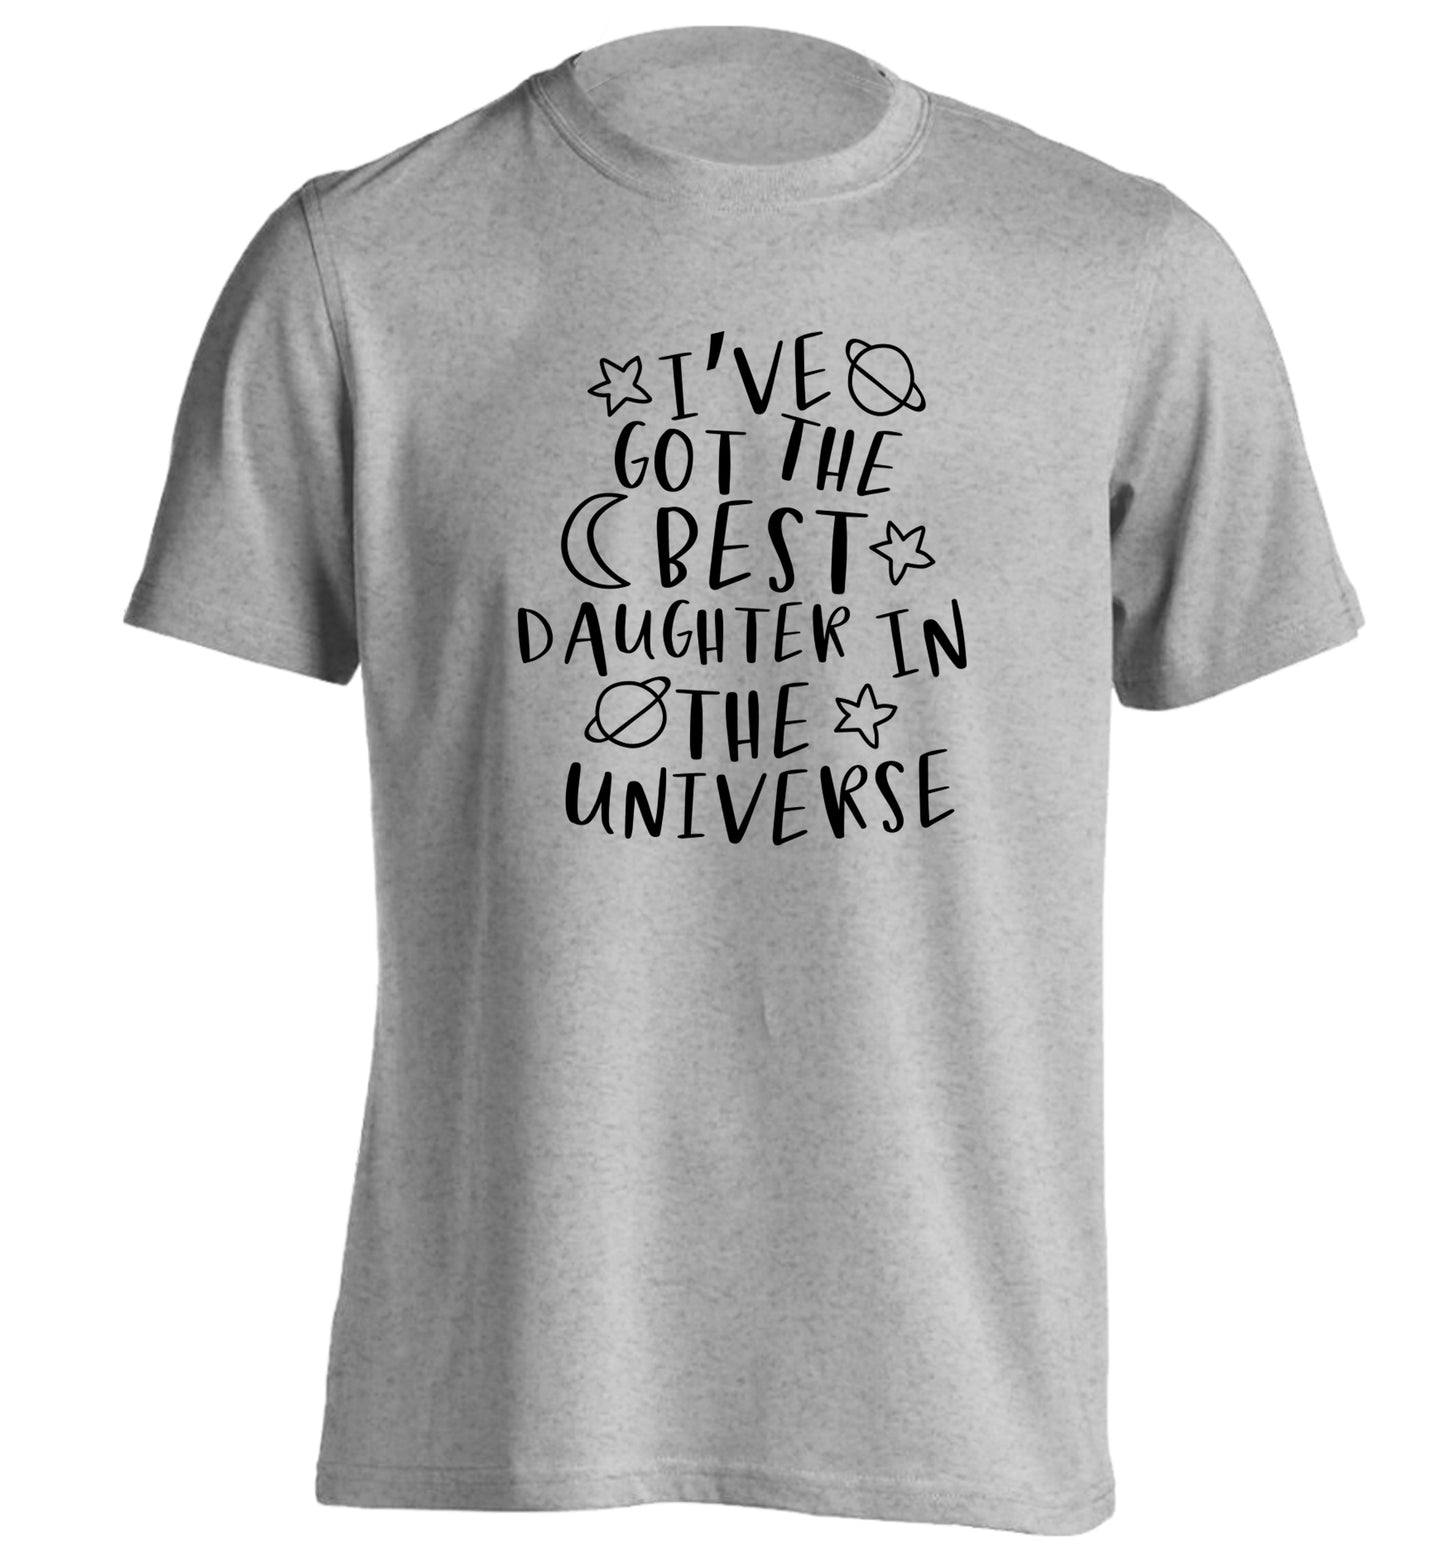 I've got the best daughter in the universe adults unisex grey Tshirt 2XL